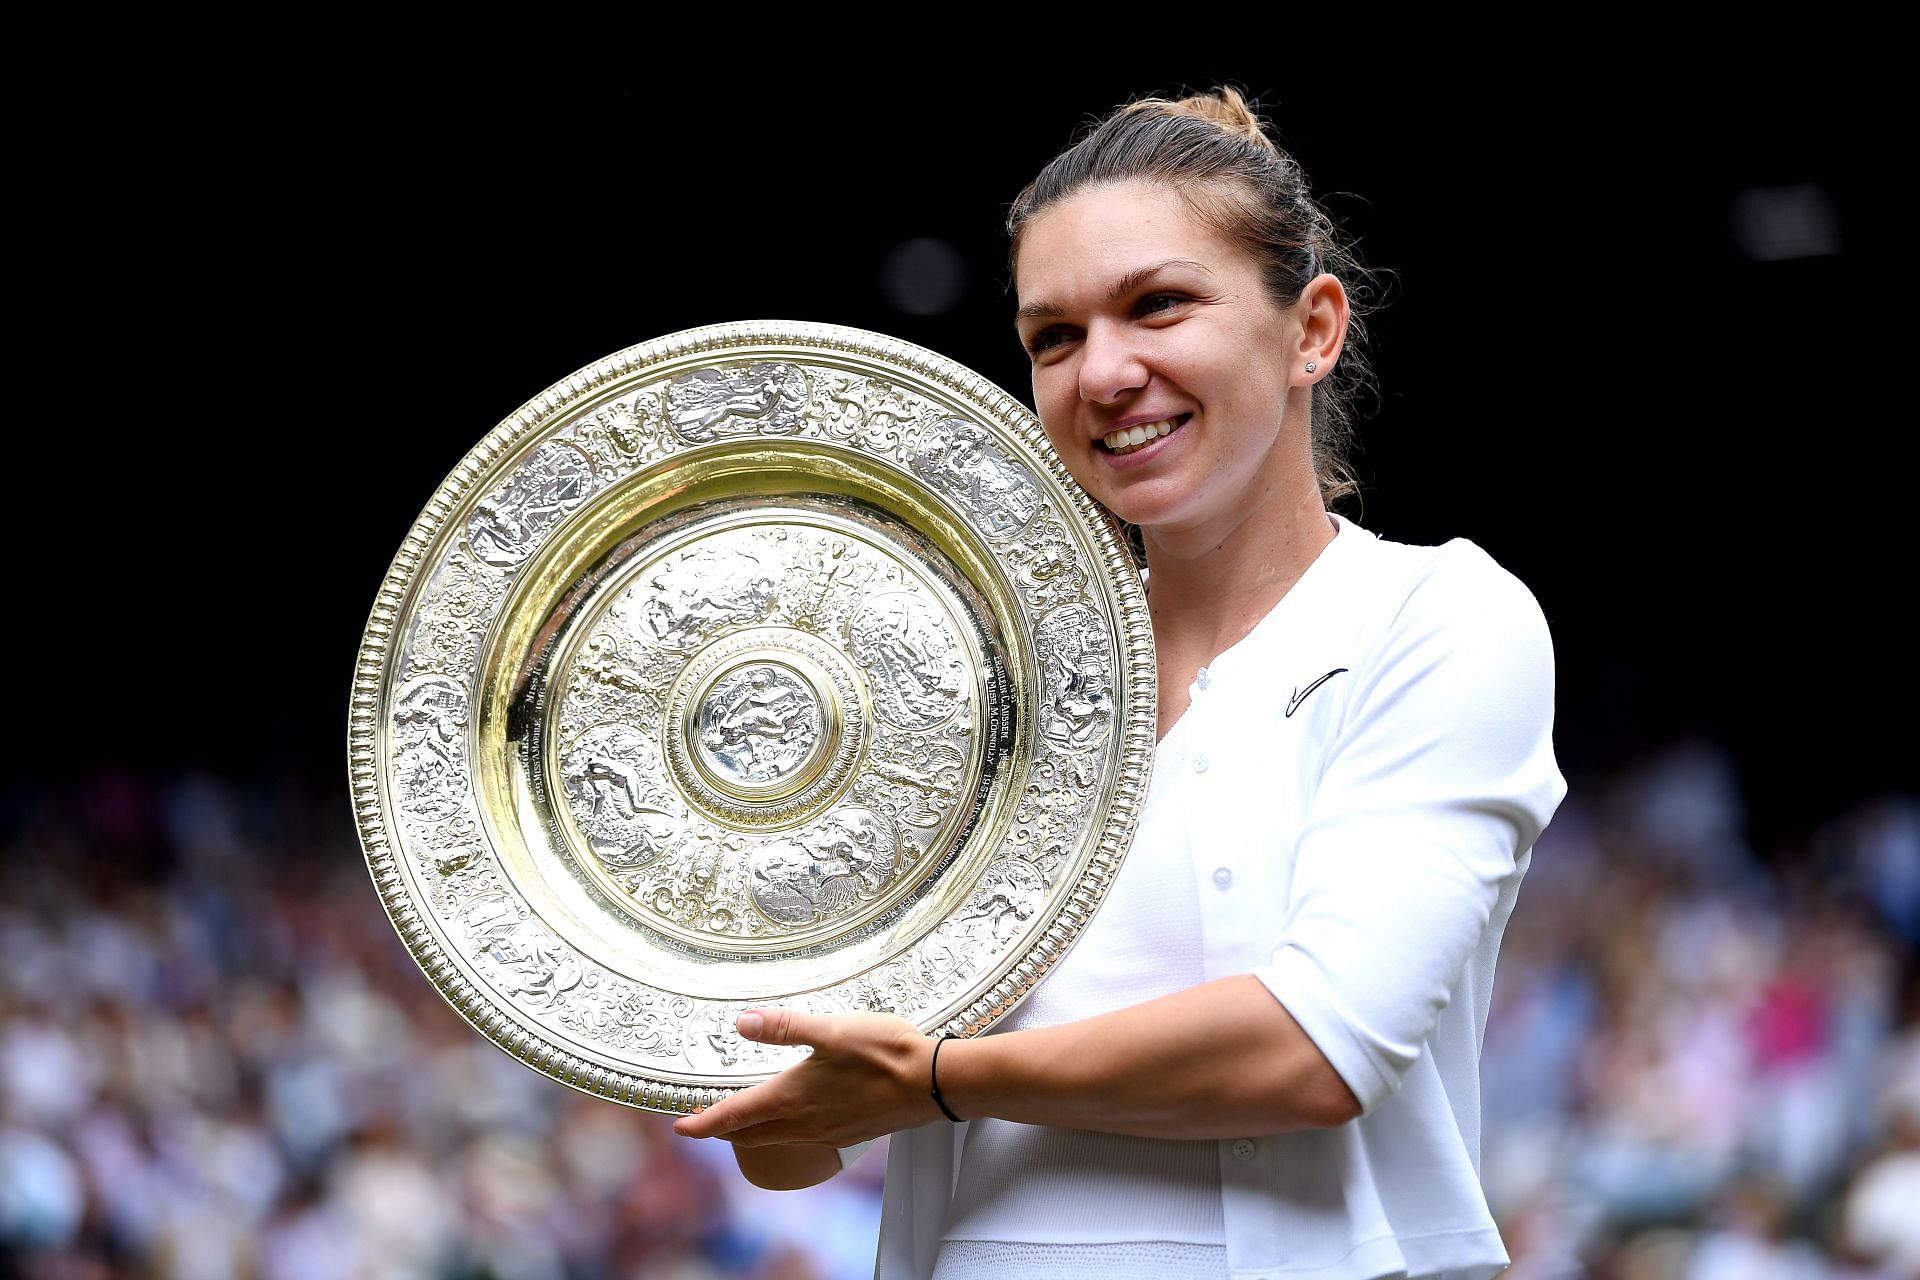 Simona Halep with the 2019 Wimbledon Championships trophy